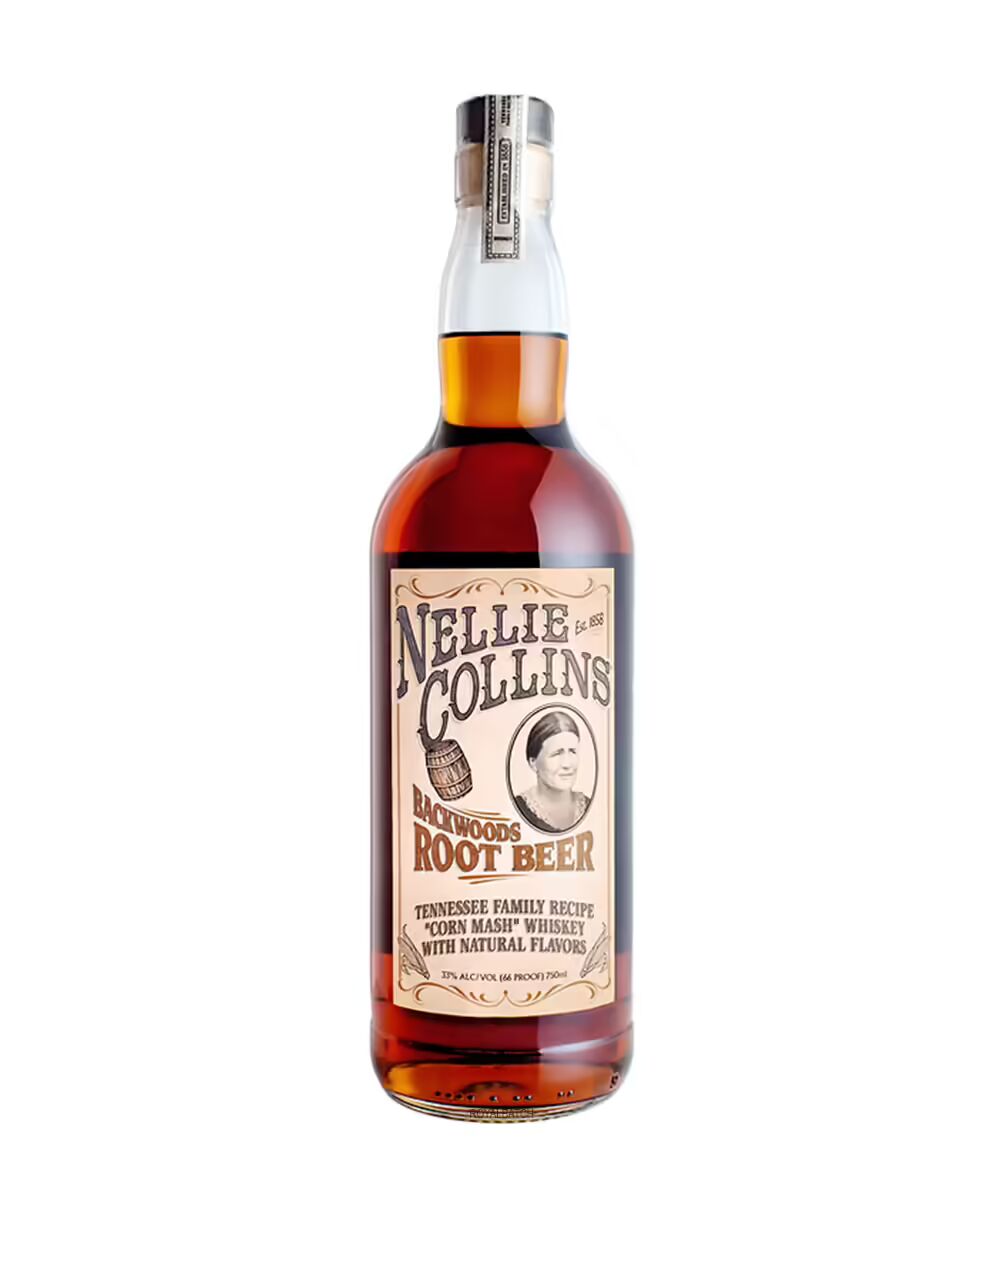 Nellie Collins Backwoods Root Beer Corn Mash Whiskey